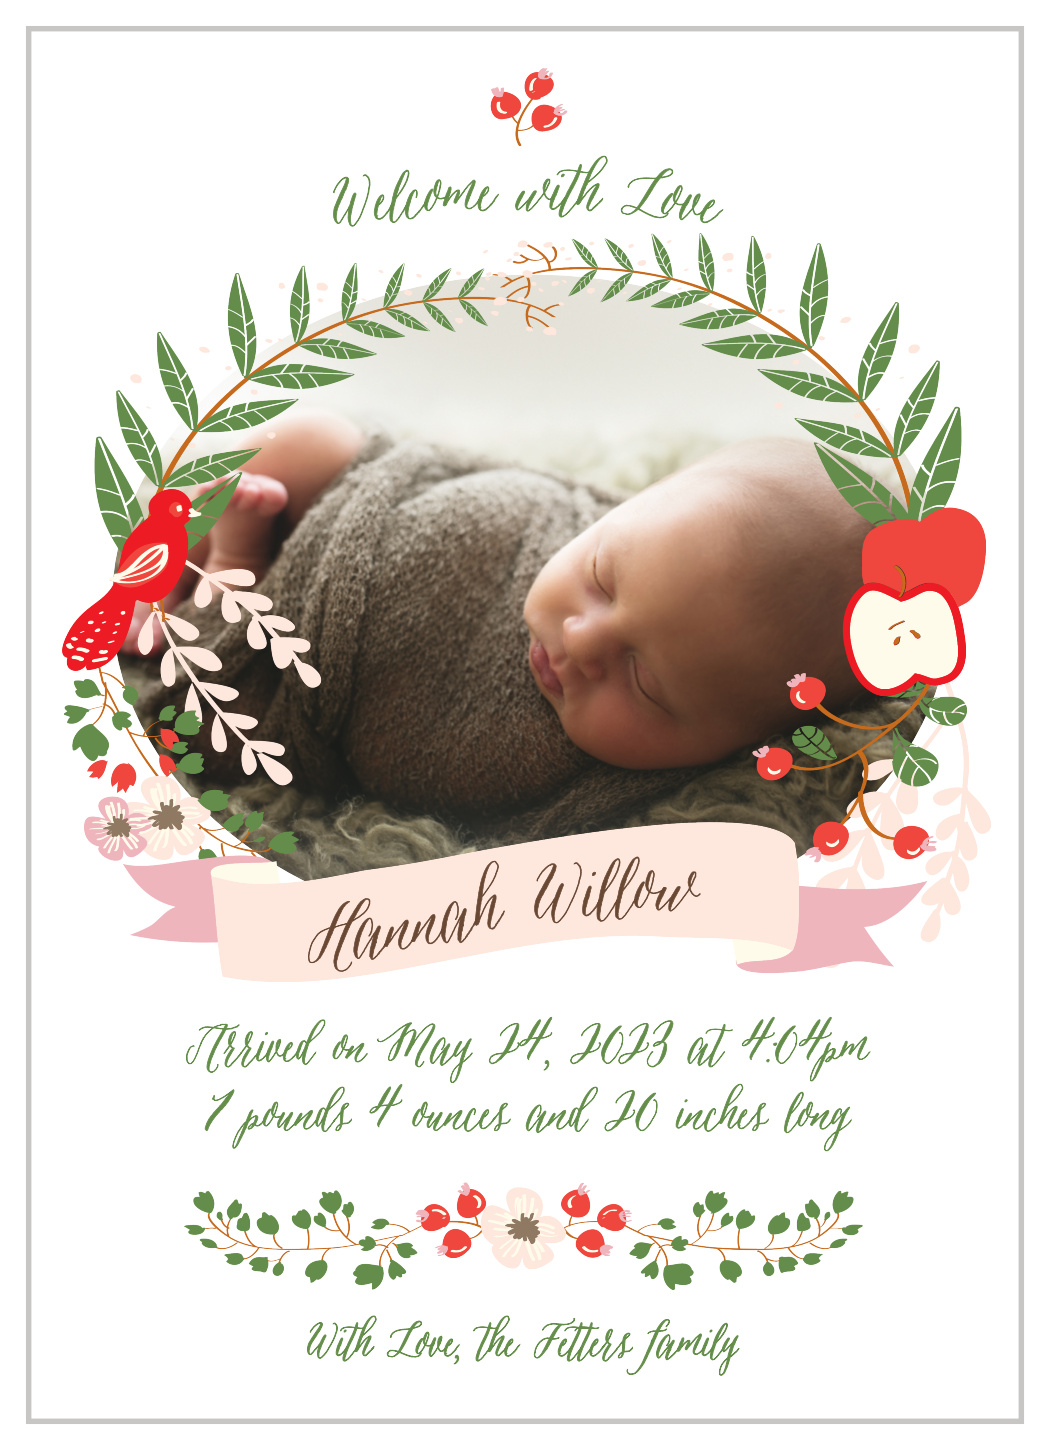 Whimsical Forest Birth Announcements